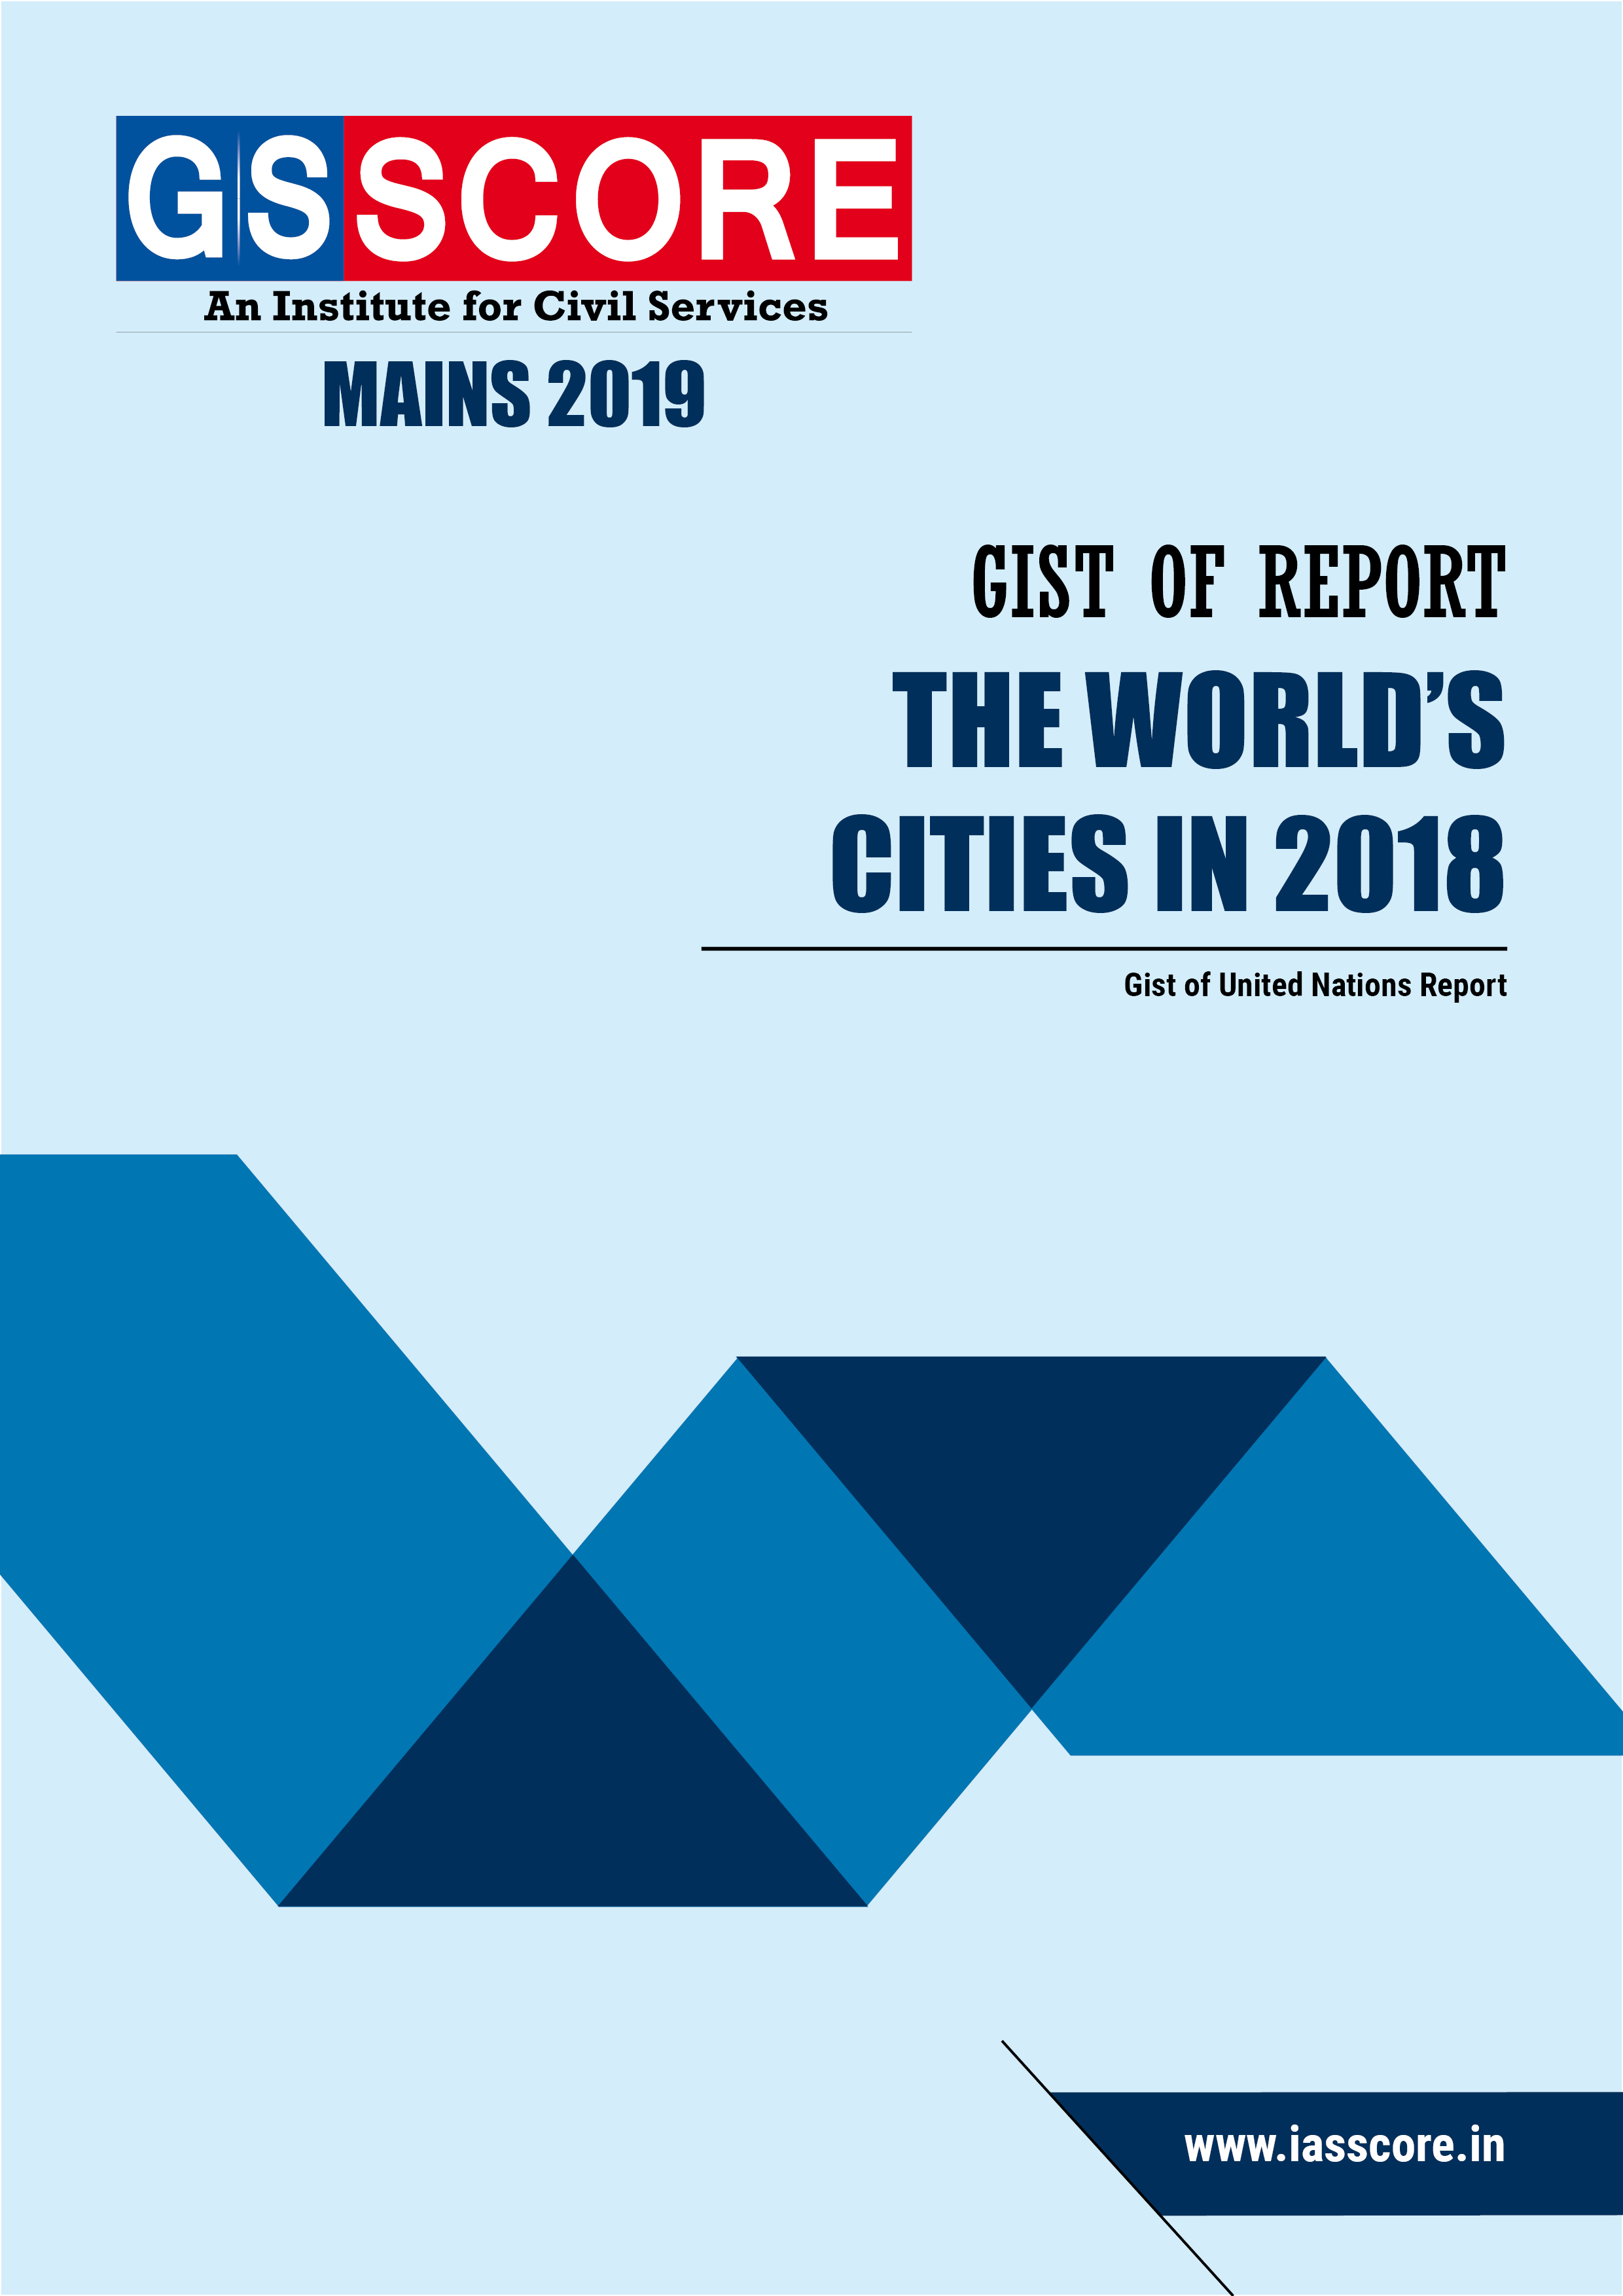 Gist of Report on “The World’s Cities in 2018”